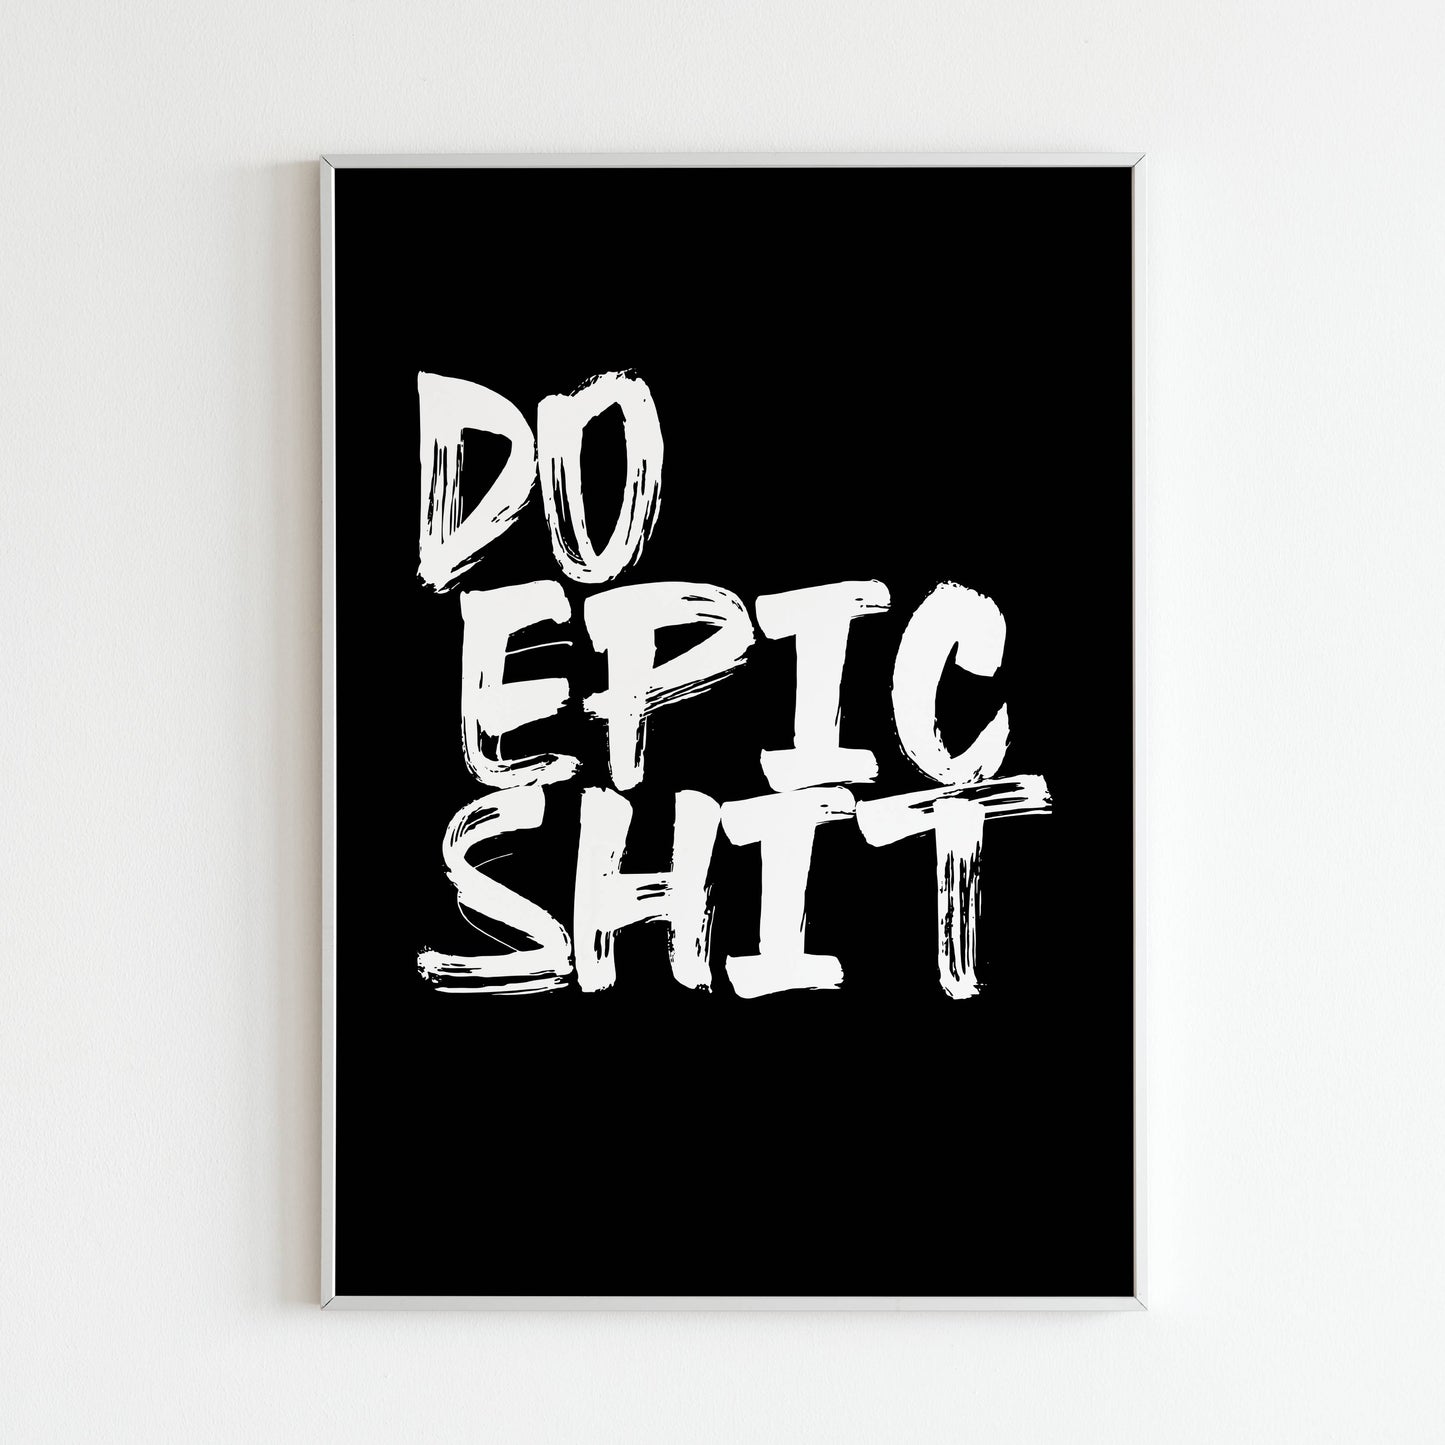 Downloadable "Do epic shit" art print, inspire yourself and others to live life to the fullest with daring adventures.